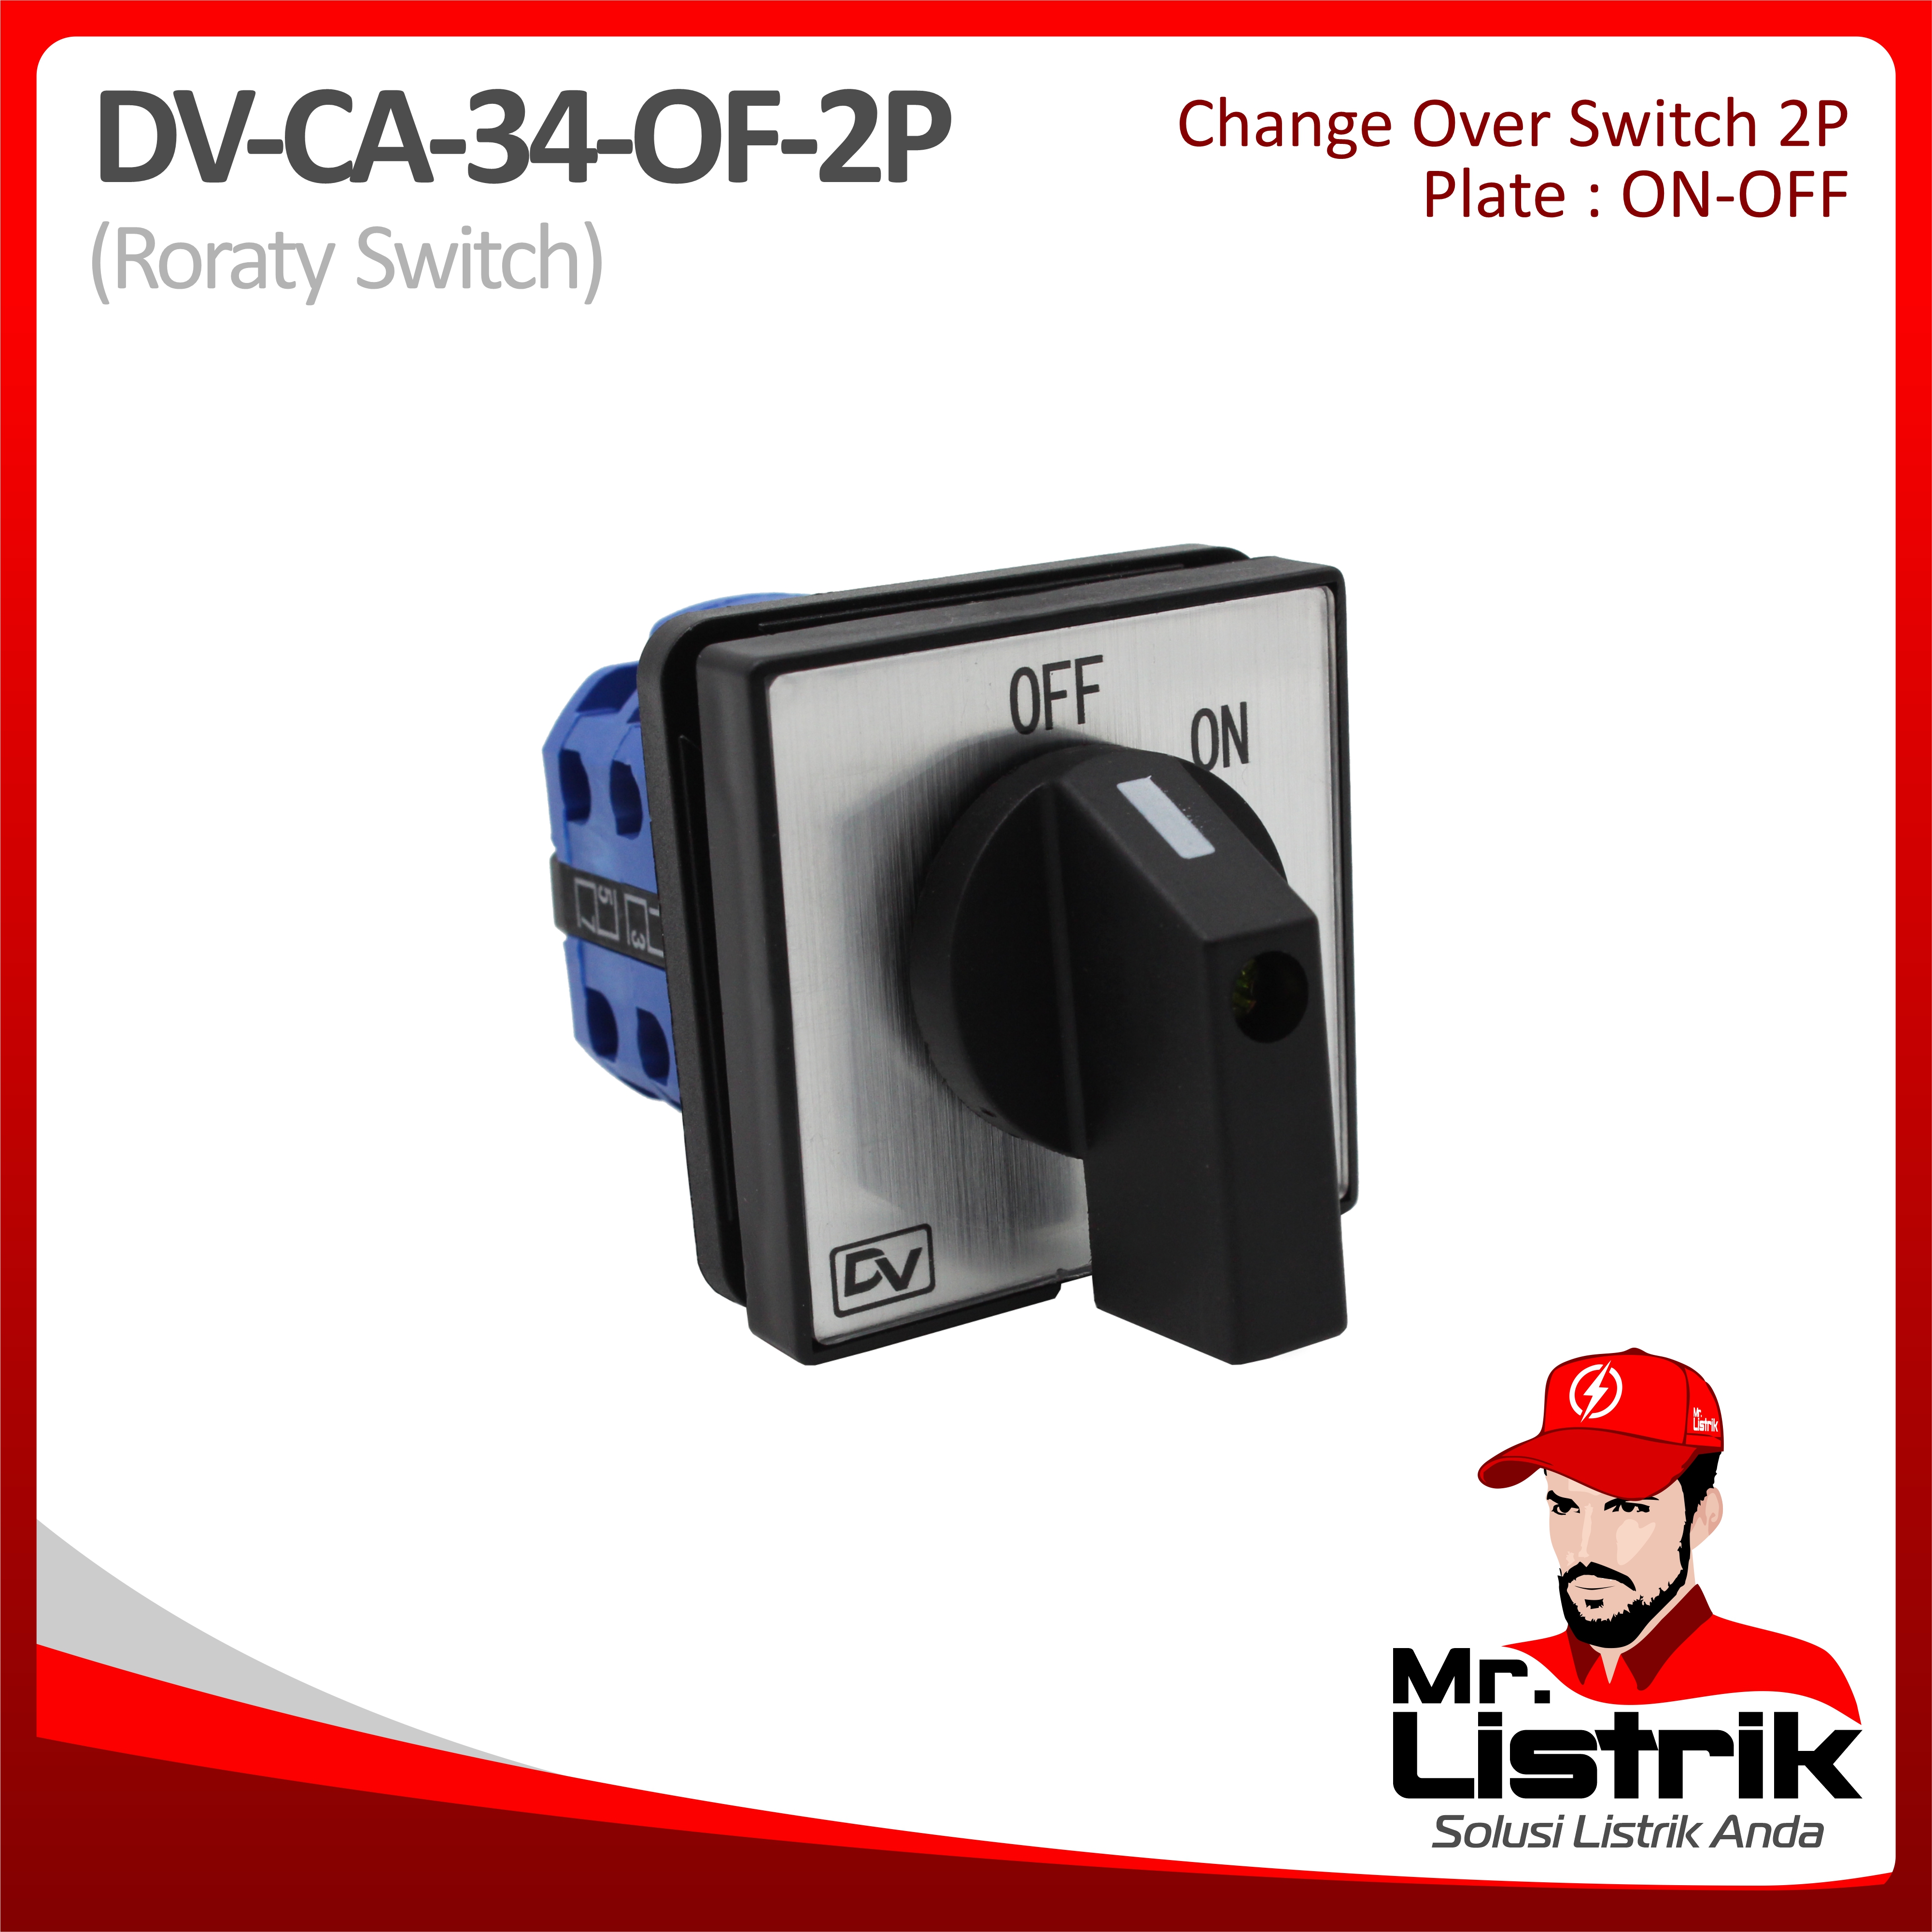 Rotary Switch On-Off 2P DV CA-34-OF-2P